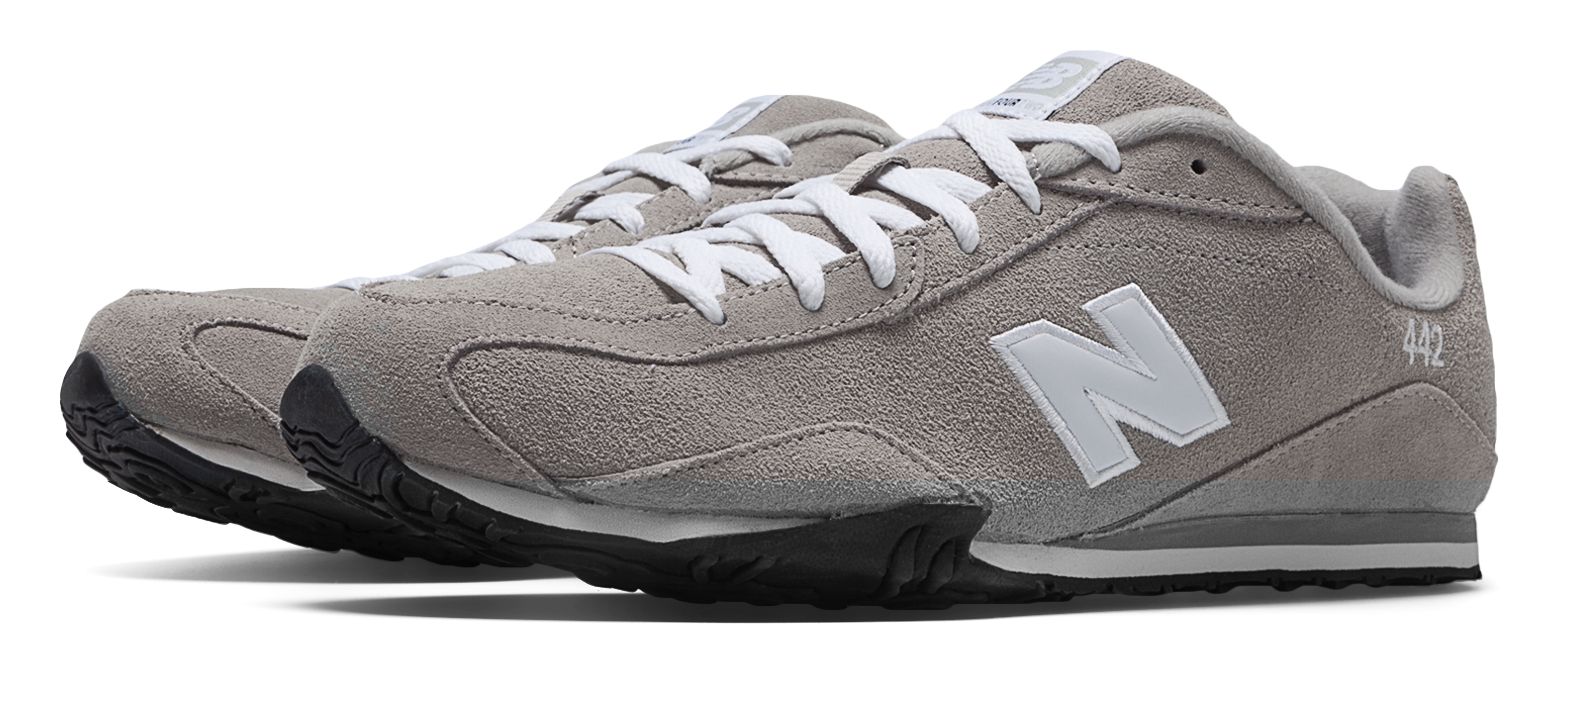 new balance 442 sneakers